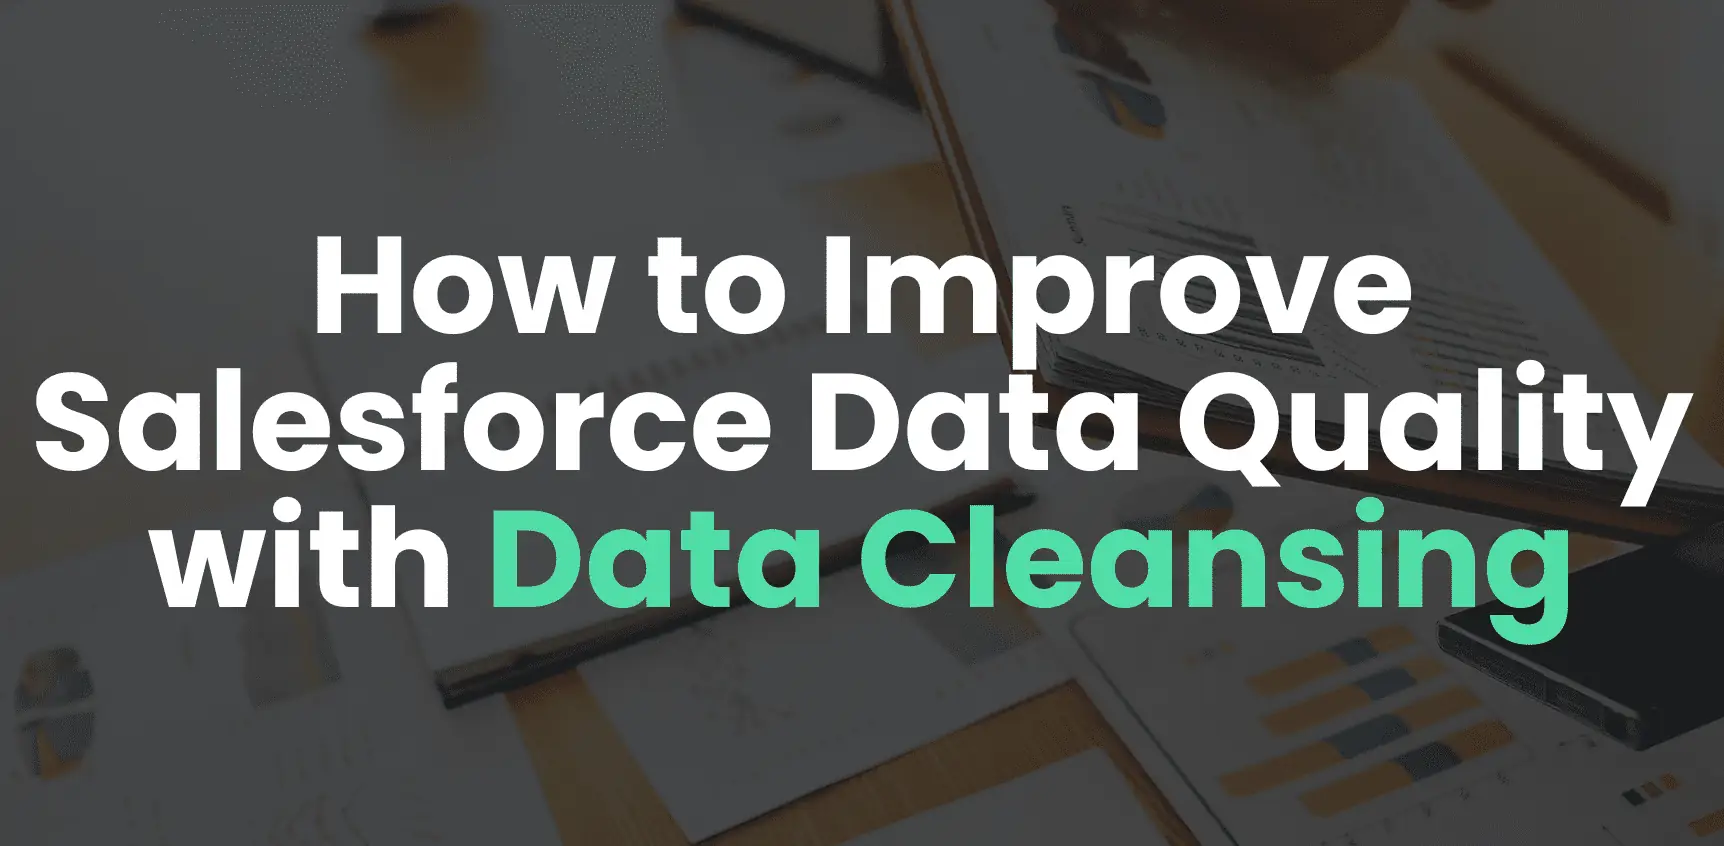 How to Improve Salesforce Data Quality with Data Cleansing